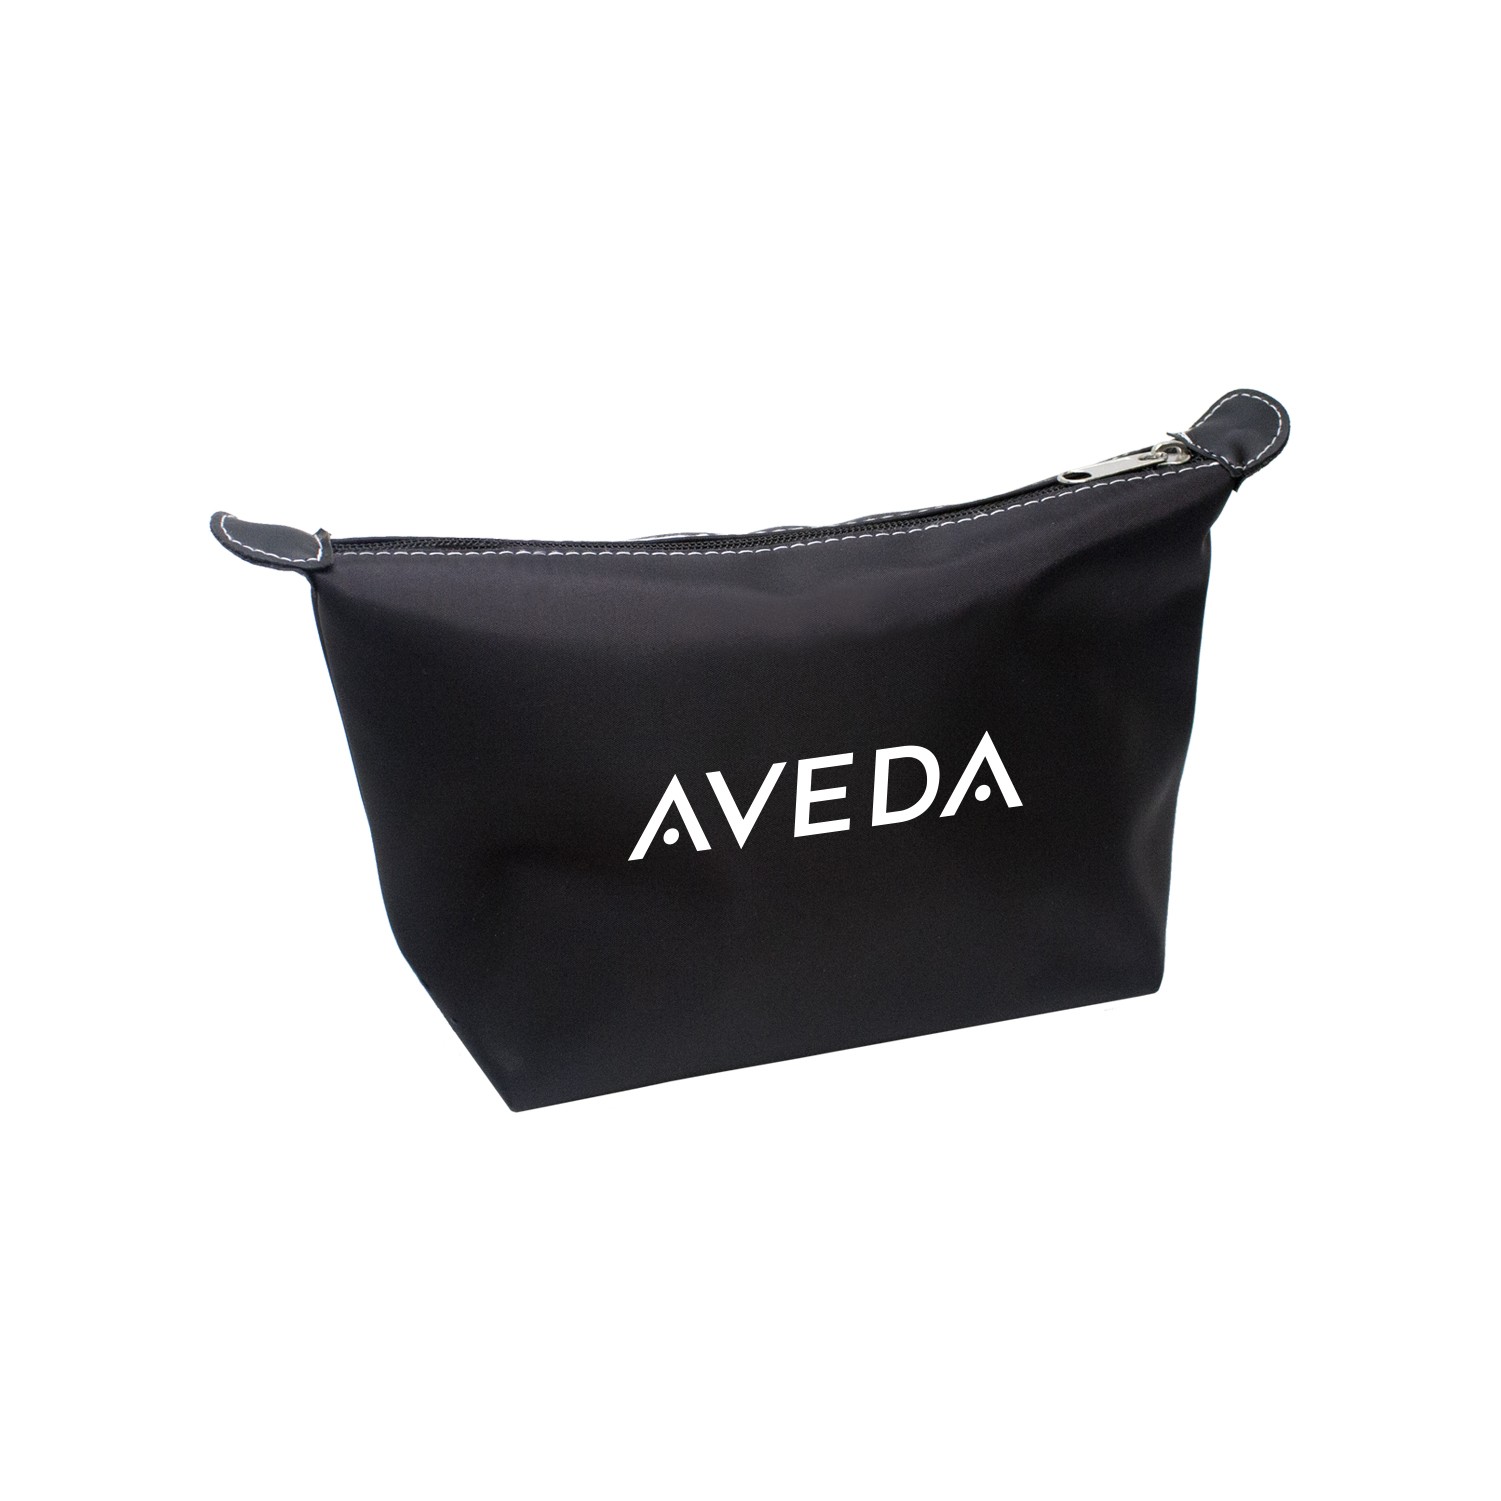 All-Around Amenity Cosmetic Bag